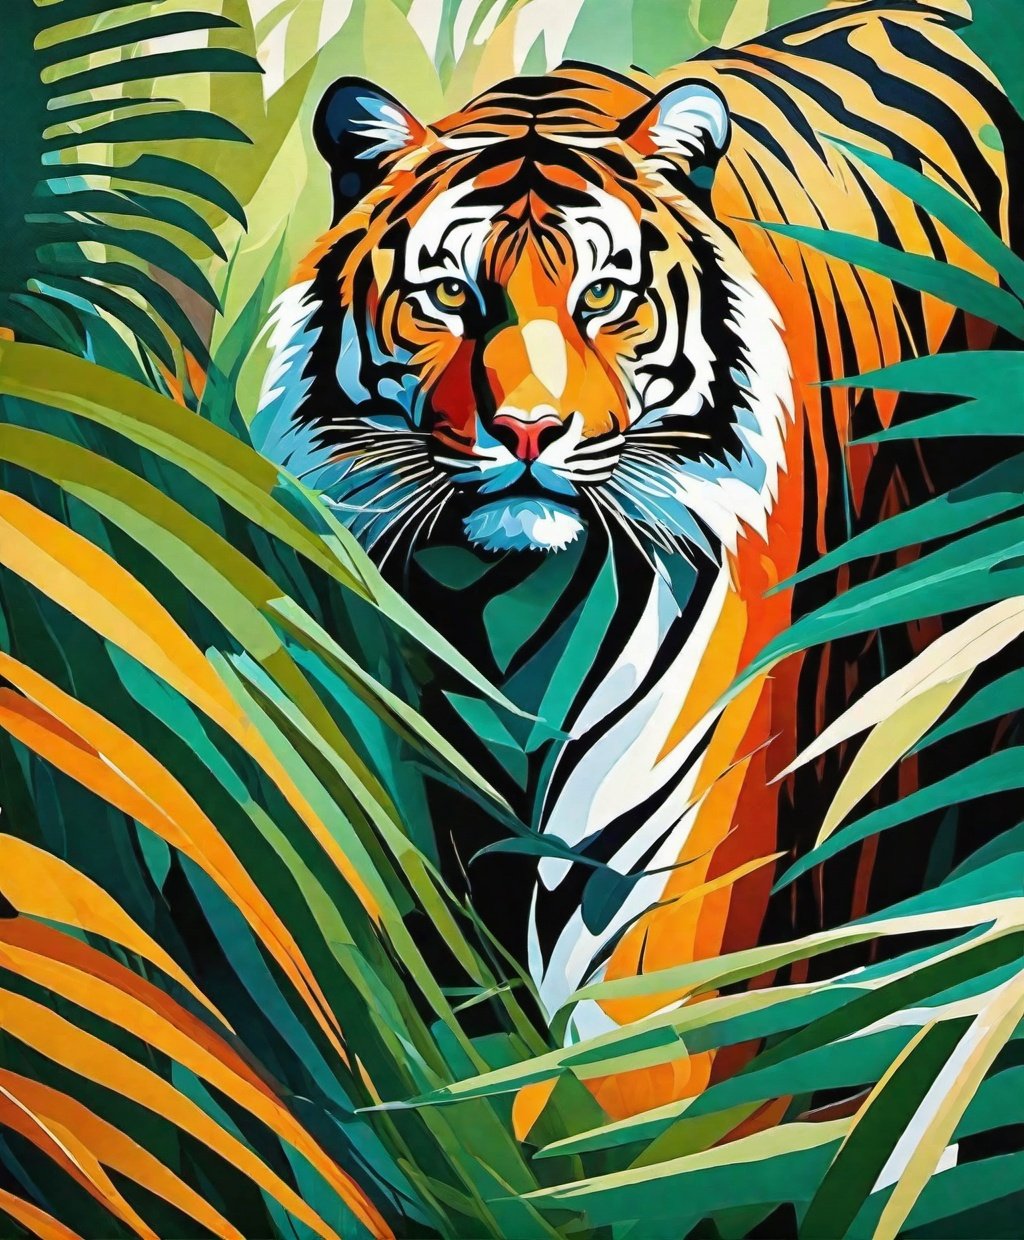 abstract style painting, tiger in jungle brush stalking prey